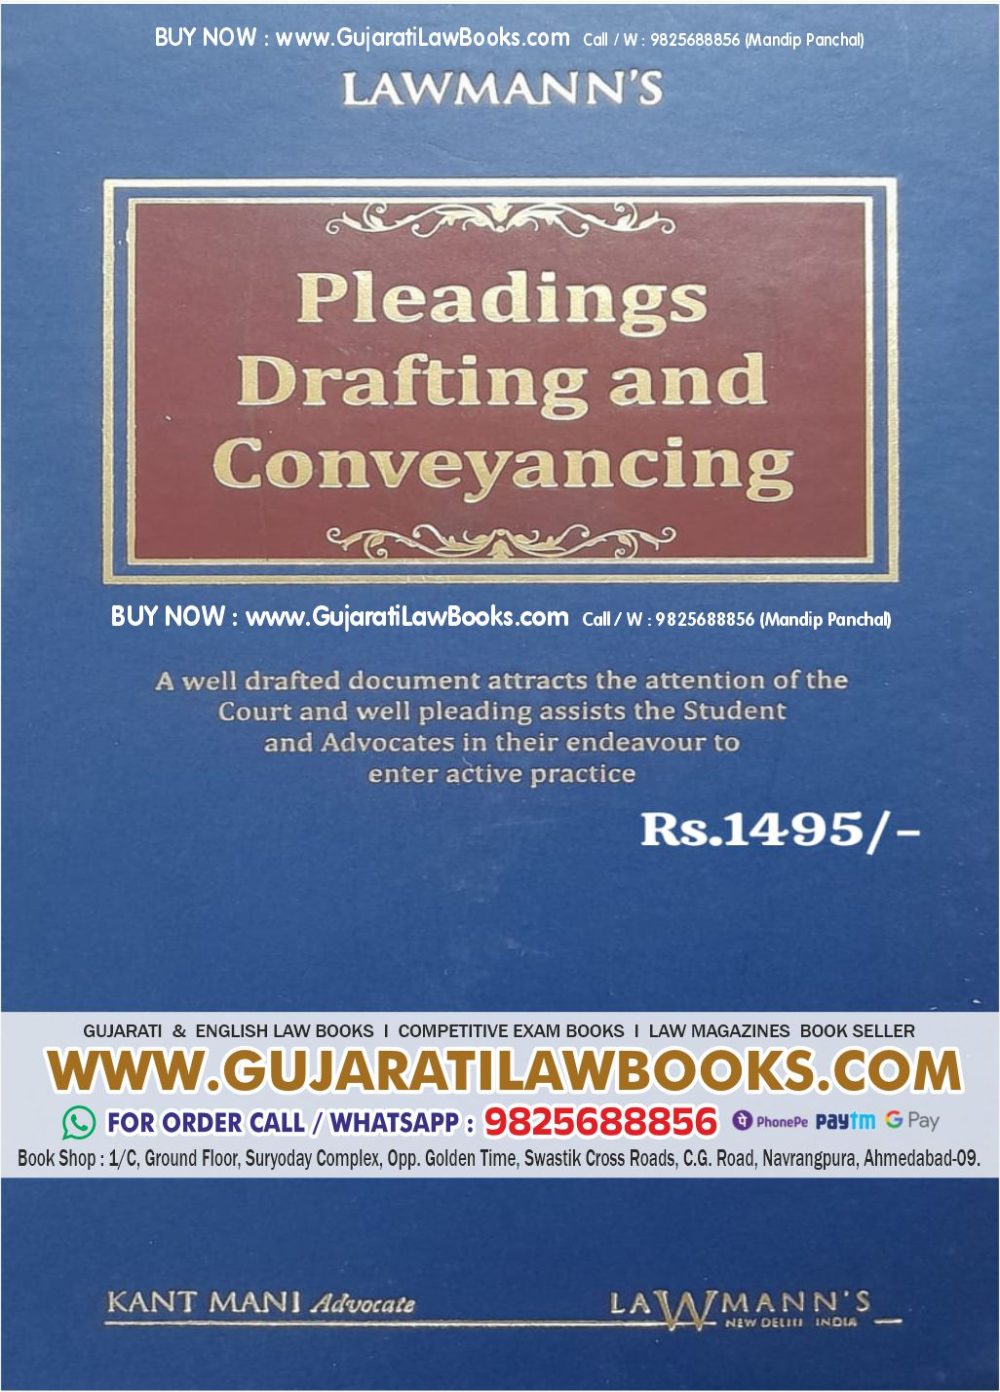 Pleadings, Drafting and Coneyancing by Kant Mani - Lawmann (Kamal) 2023-24